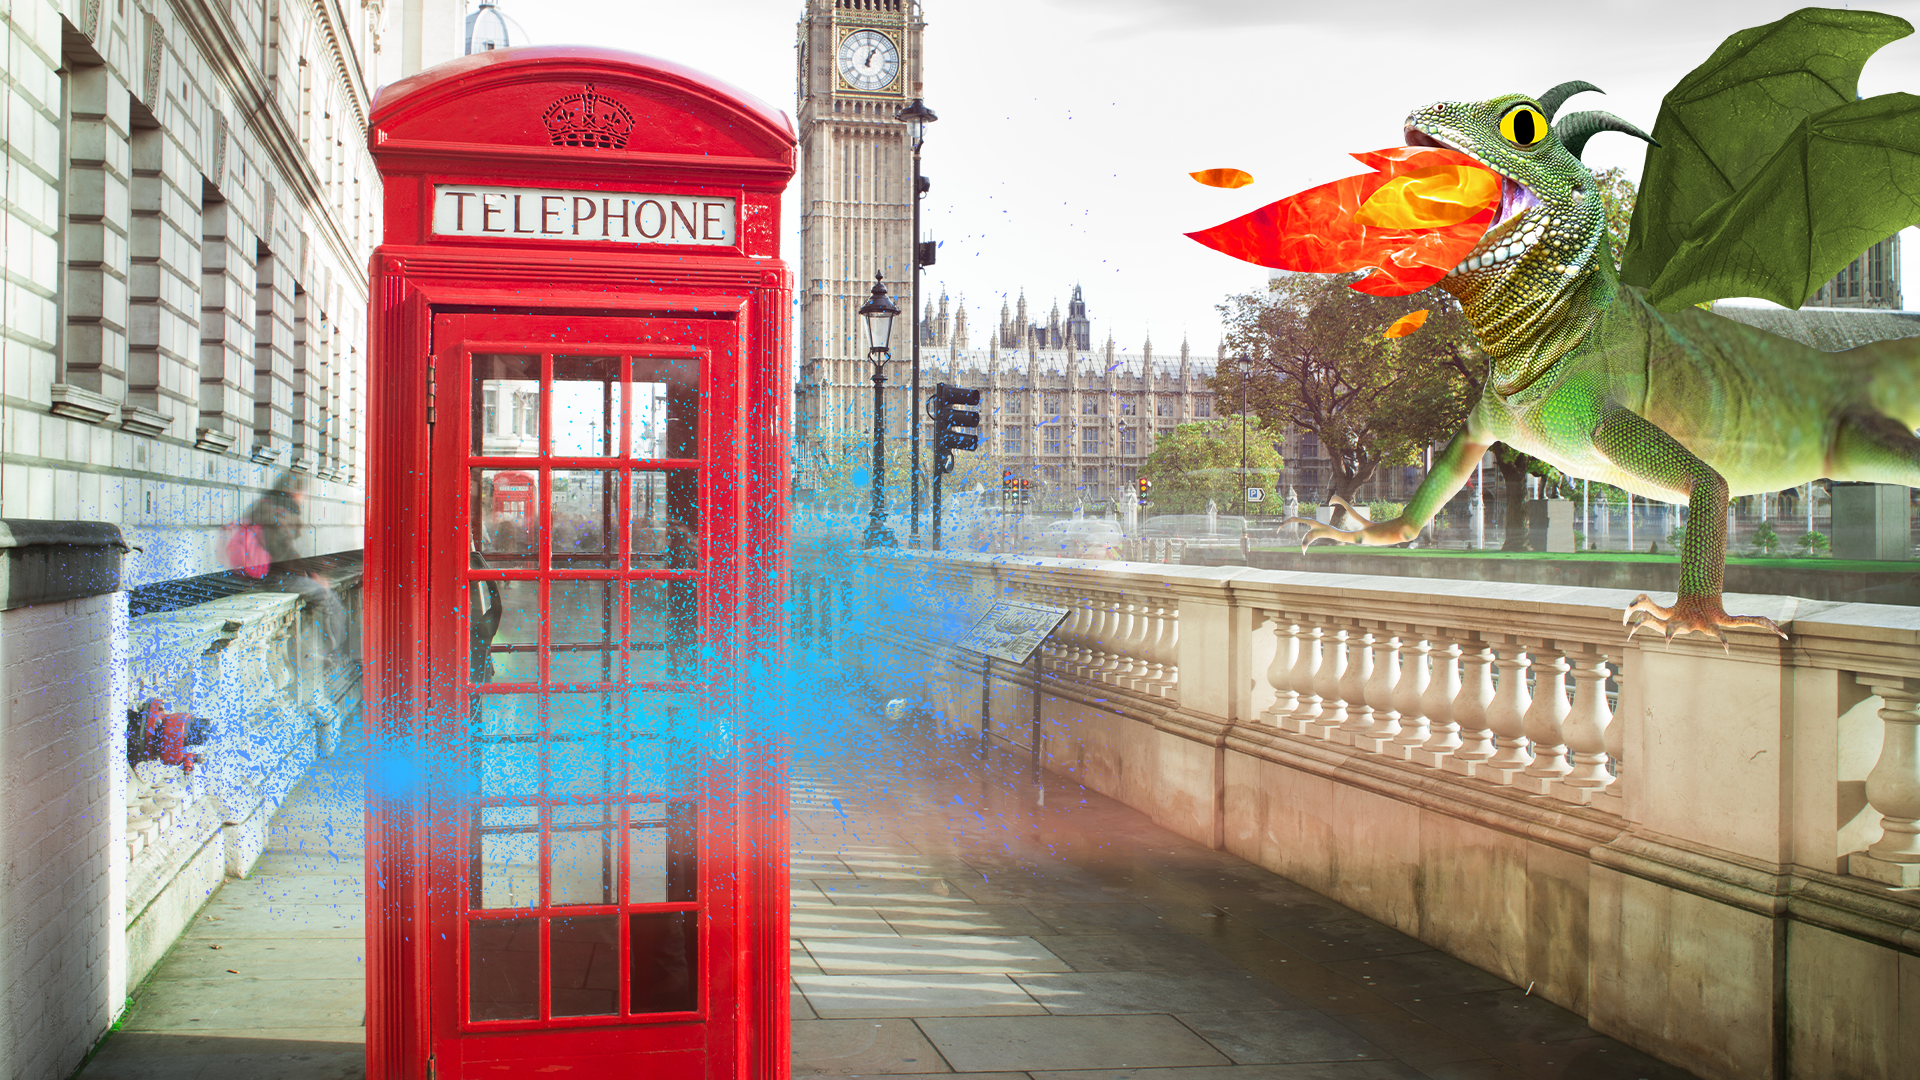 London telephone box with dragon and magic dust